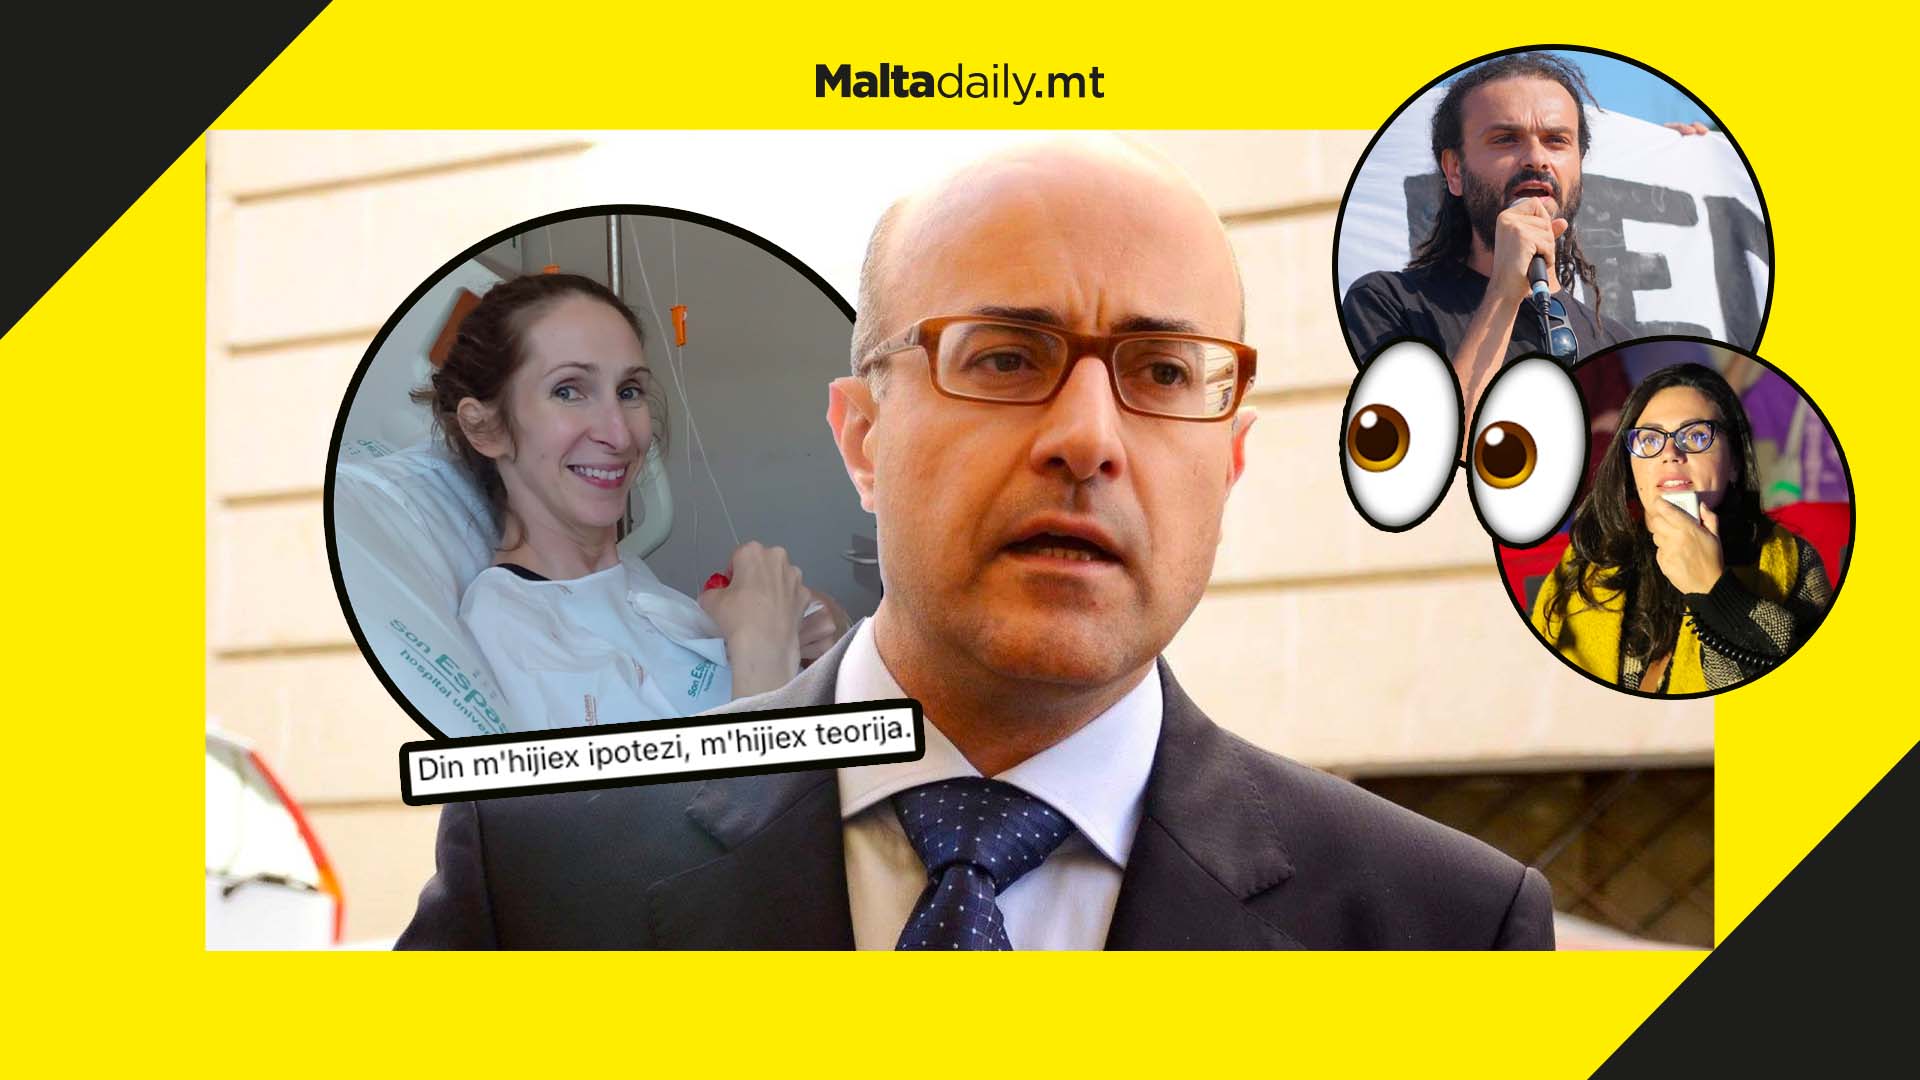 Jason Azzopardi claims Prudente was brought to Malta to push abortion controversy